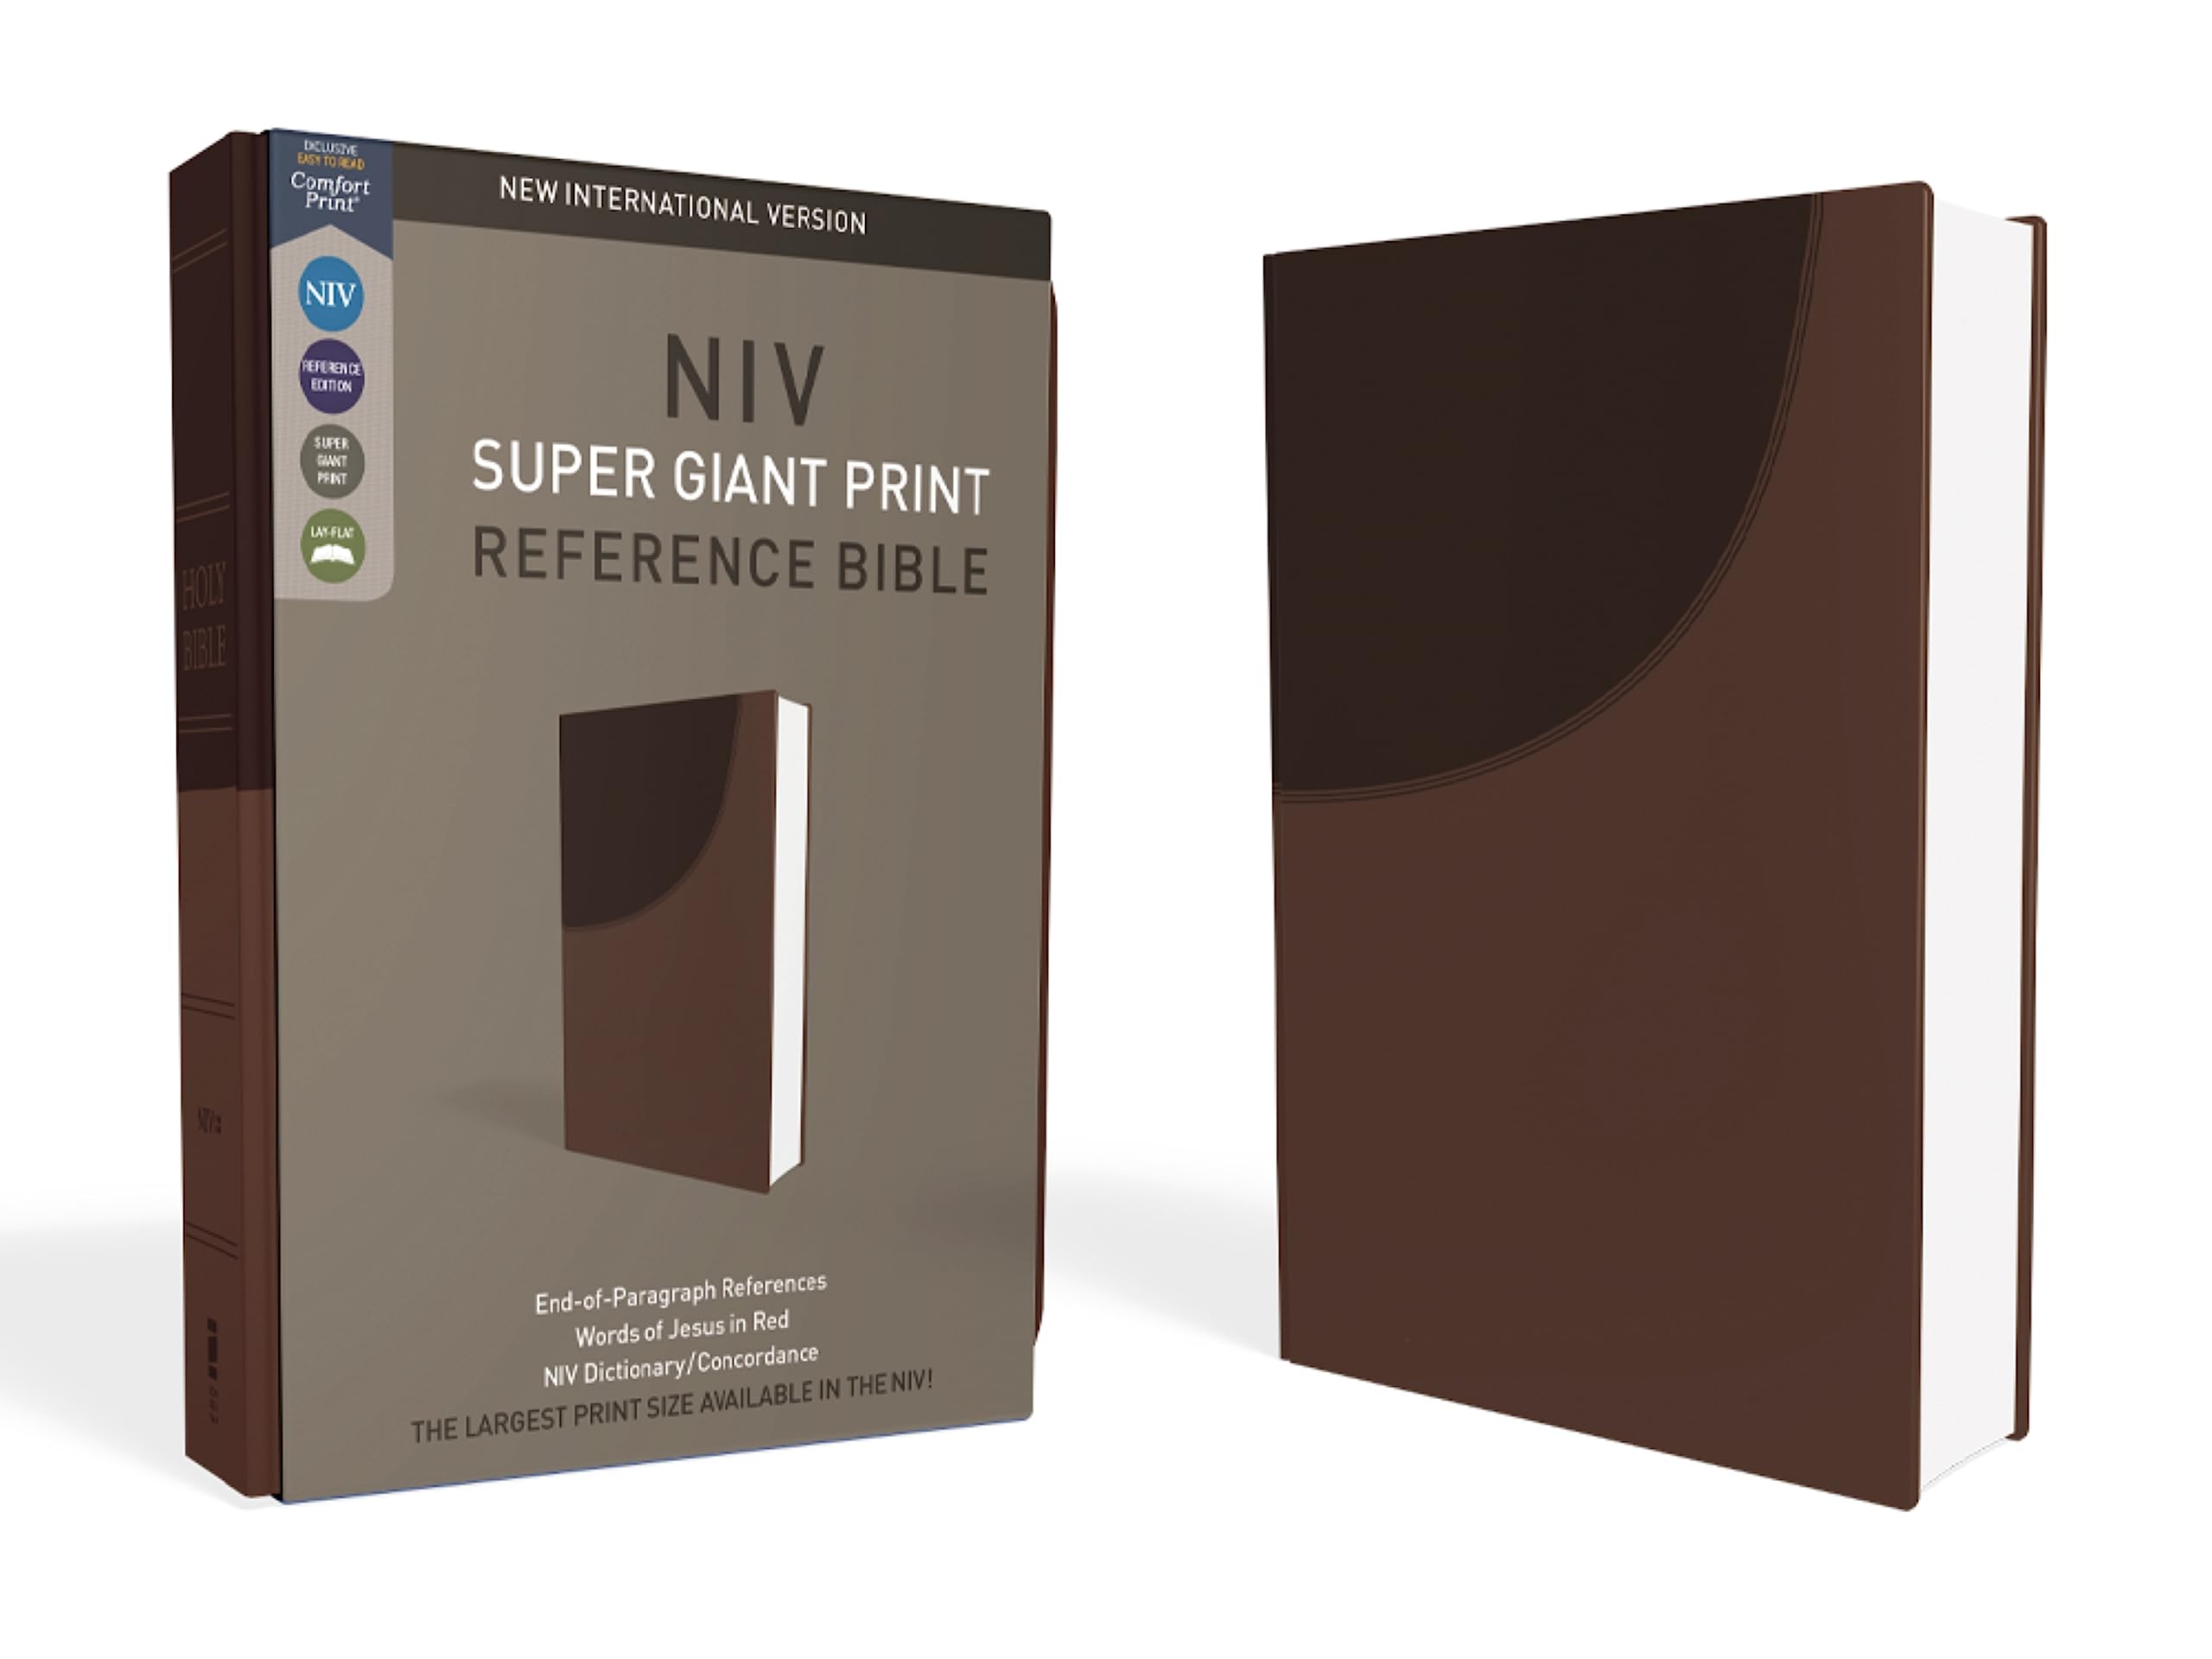 NIV, Super Giant Print Reference Bible, Imitation Leather, Brown, Red Letter Edition by Zondervan